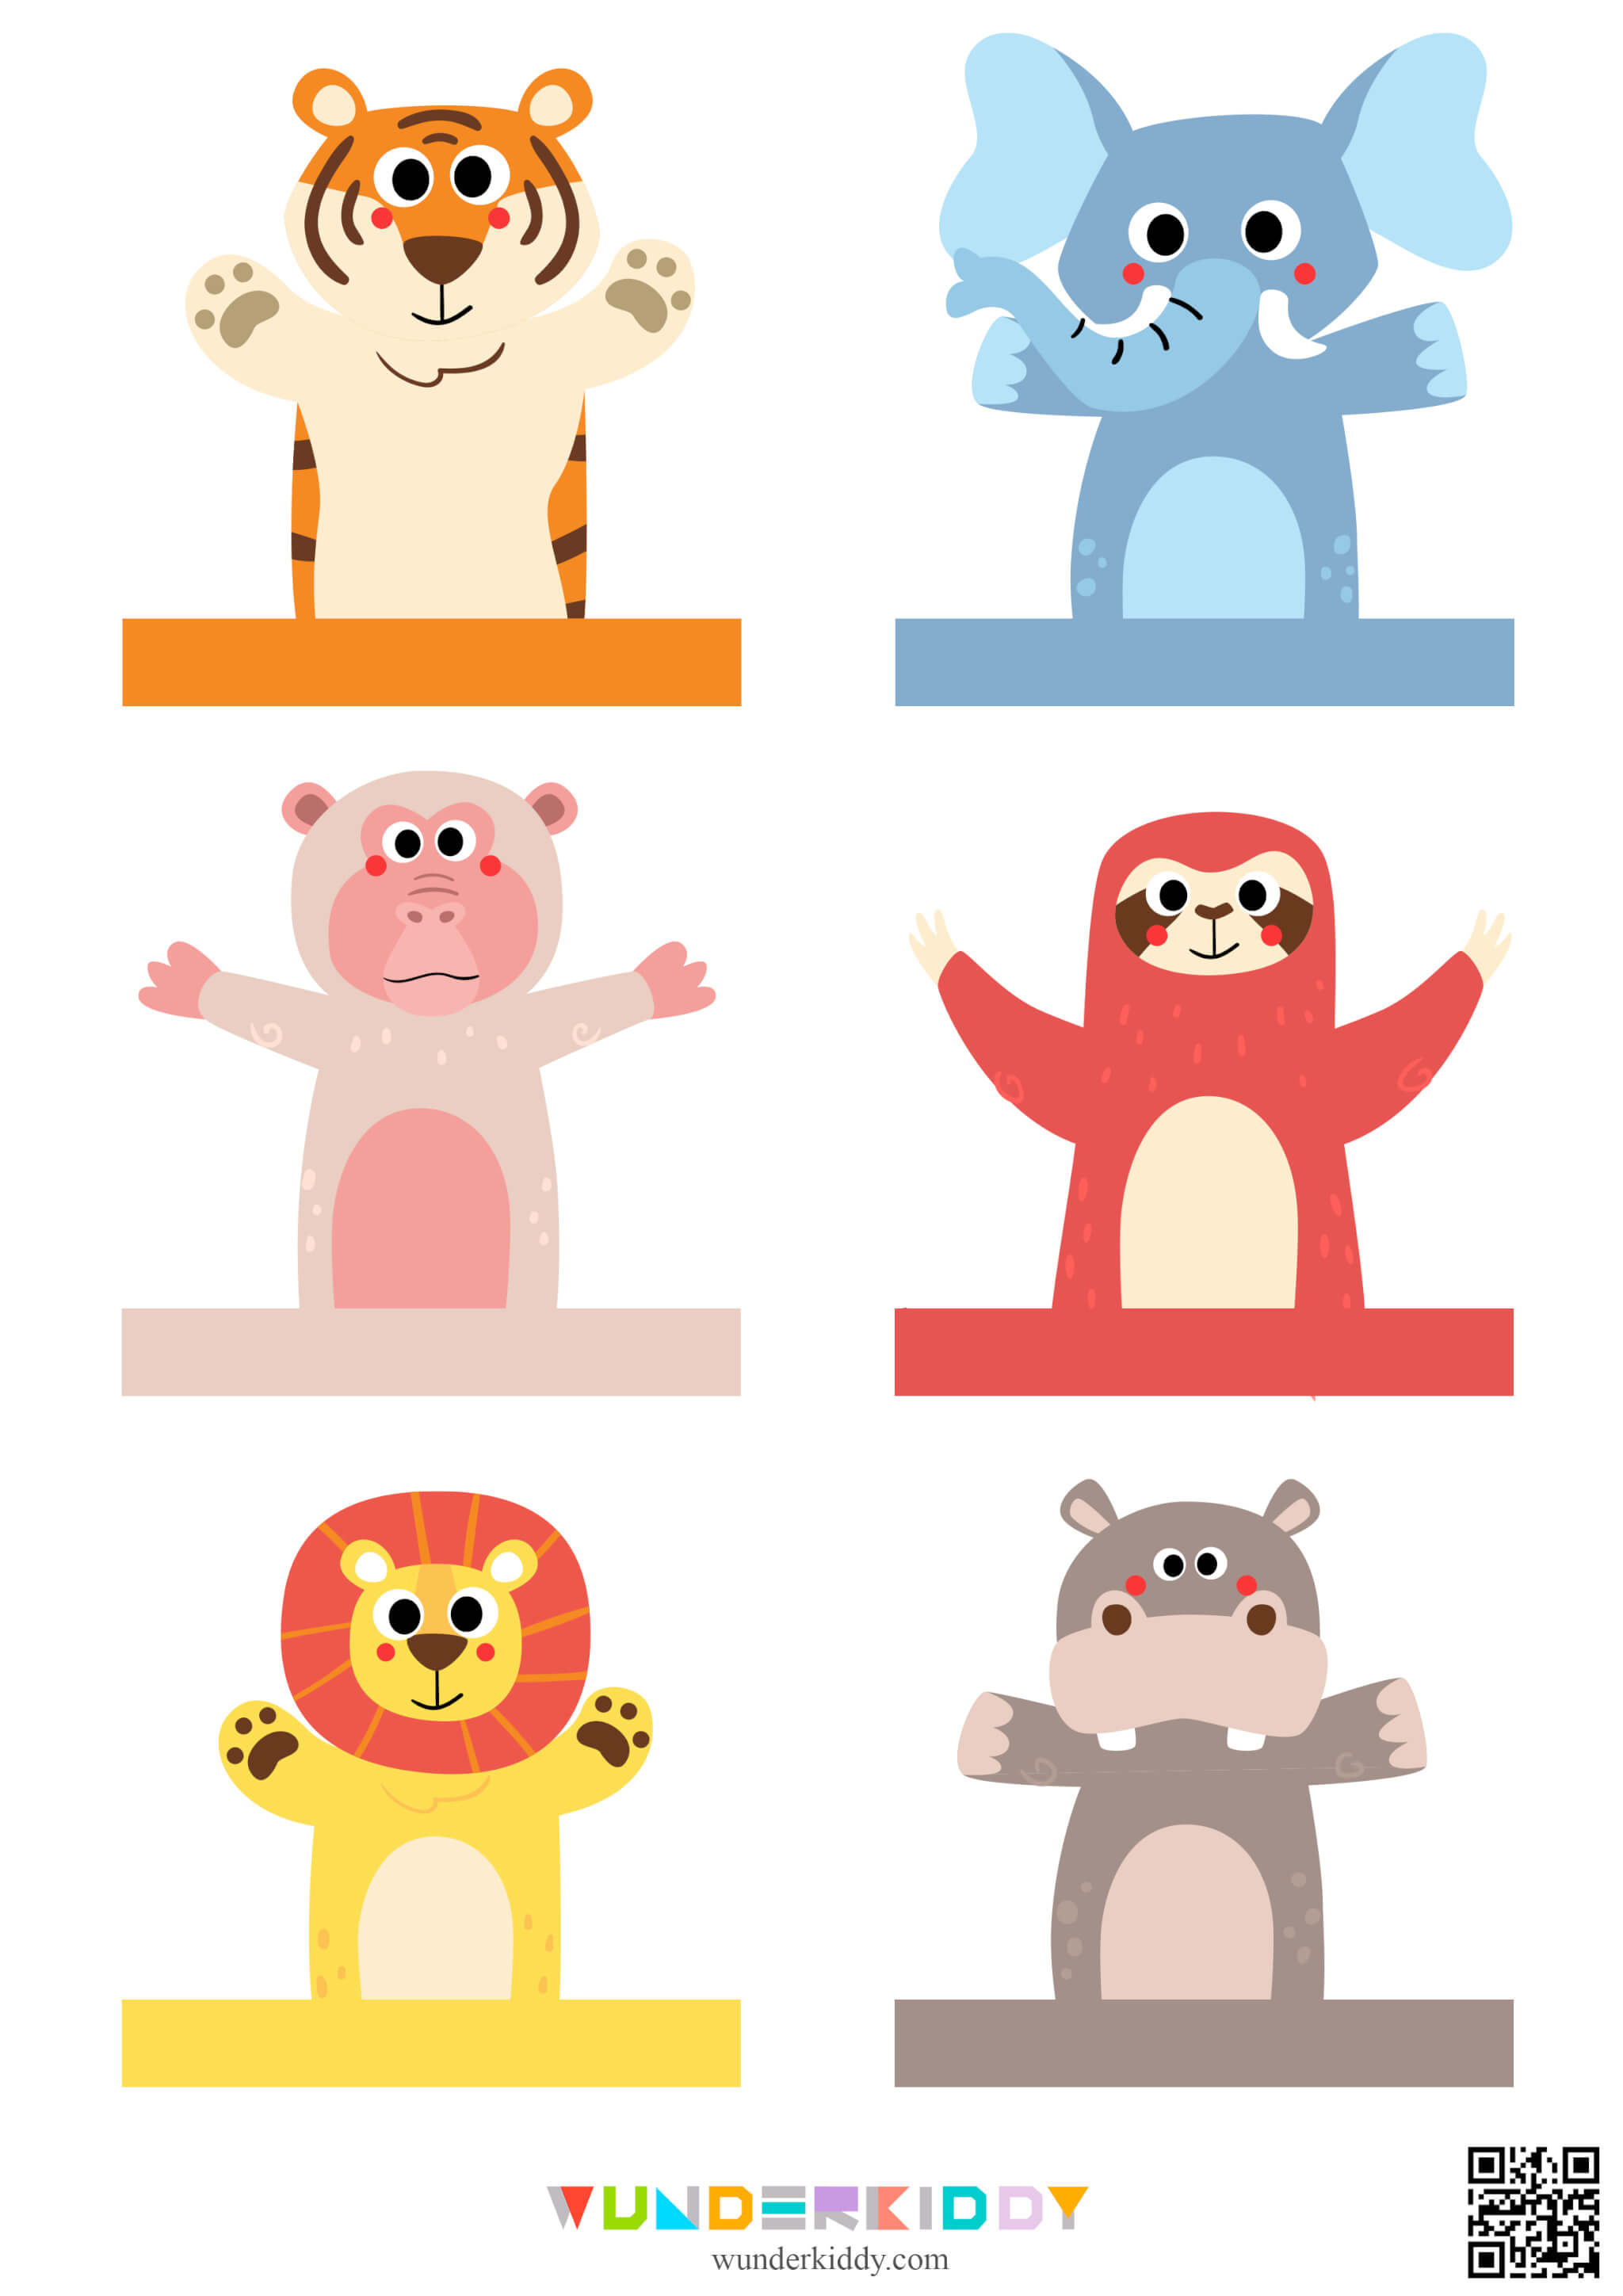 Template «Finger Puppets» - Image 3